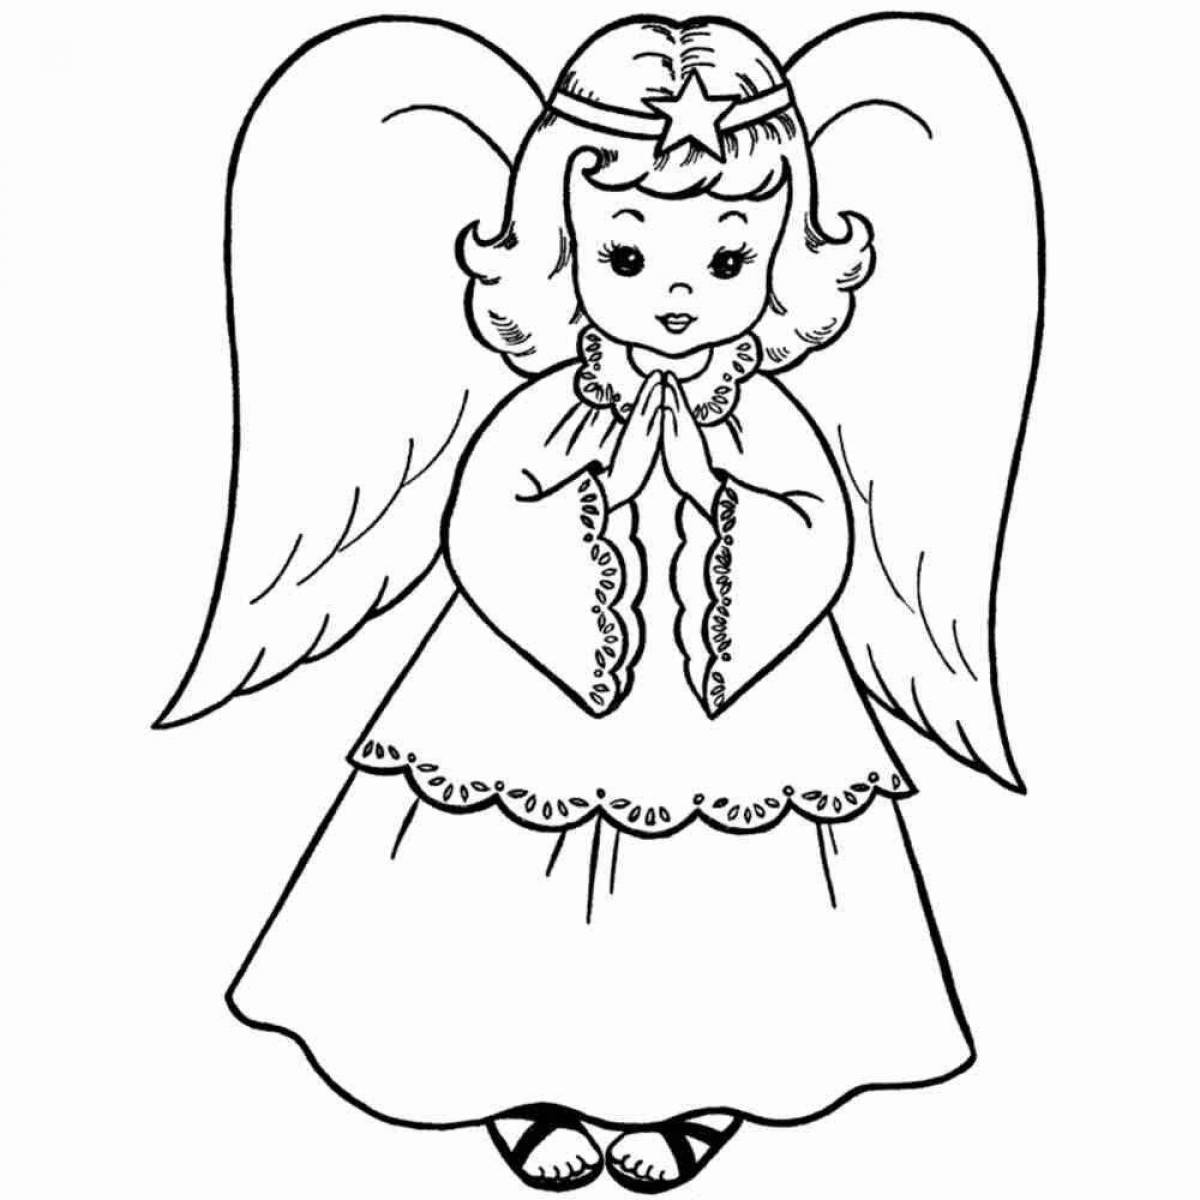 Whimsical angel coloring book for 3-4 year olds